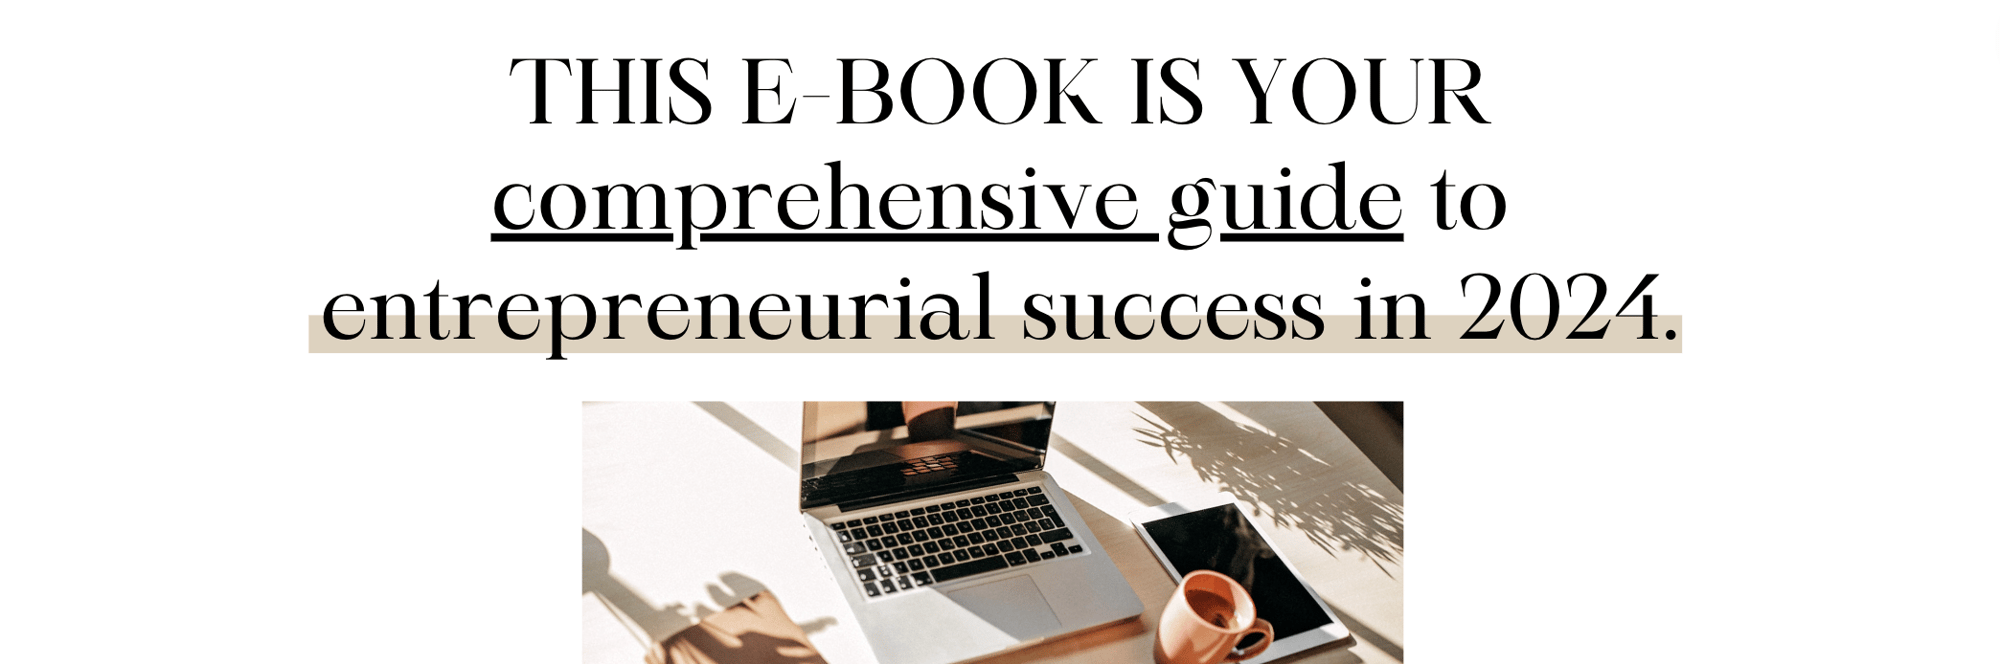 this e-book is your comprehensive guide to entrepreneurial success in 2024